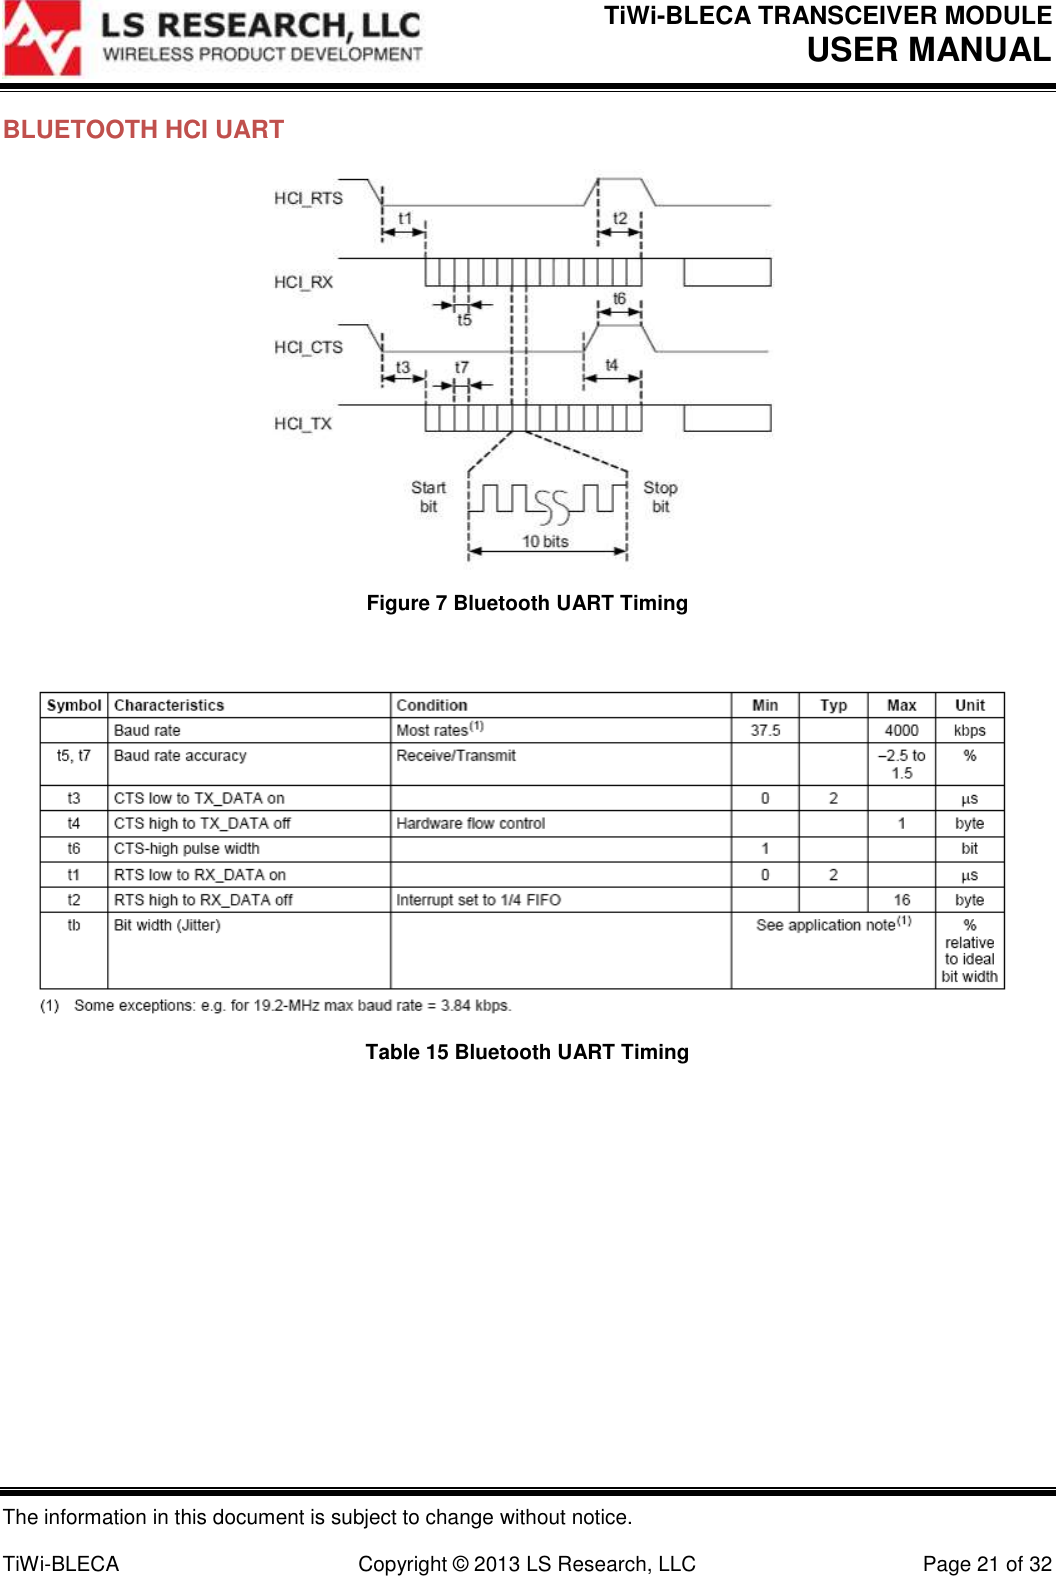 TiWi-BLECA TRANSCEIVER MODULE USER MANUAL   The information in this document is subject to change without notice.  TiWi-BLECA  Copyright © 2013 LS Research, LLC  Page 21 of 32 BLUETOOTH HCI UART  Figure 7 Bluetooth UART Timing   Table 15 Bluetooth UART Timing    